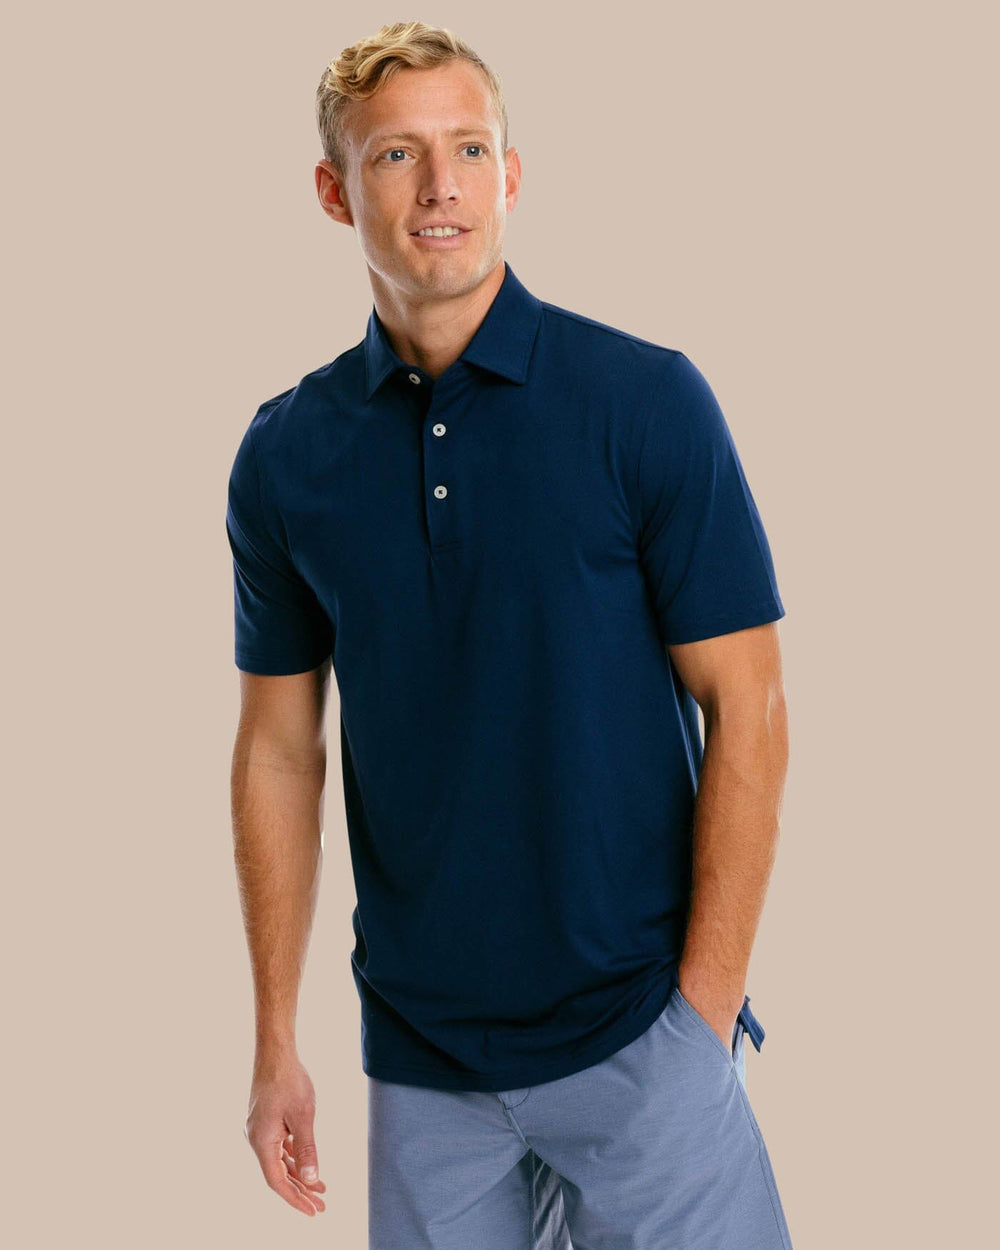 The front of the Men's Ryder Performance Polo Shirt by Southern Tide - True Navy